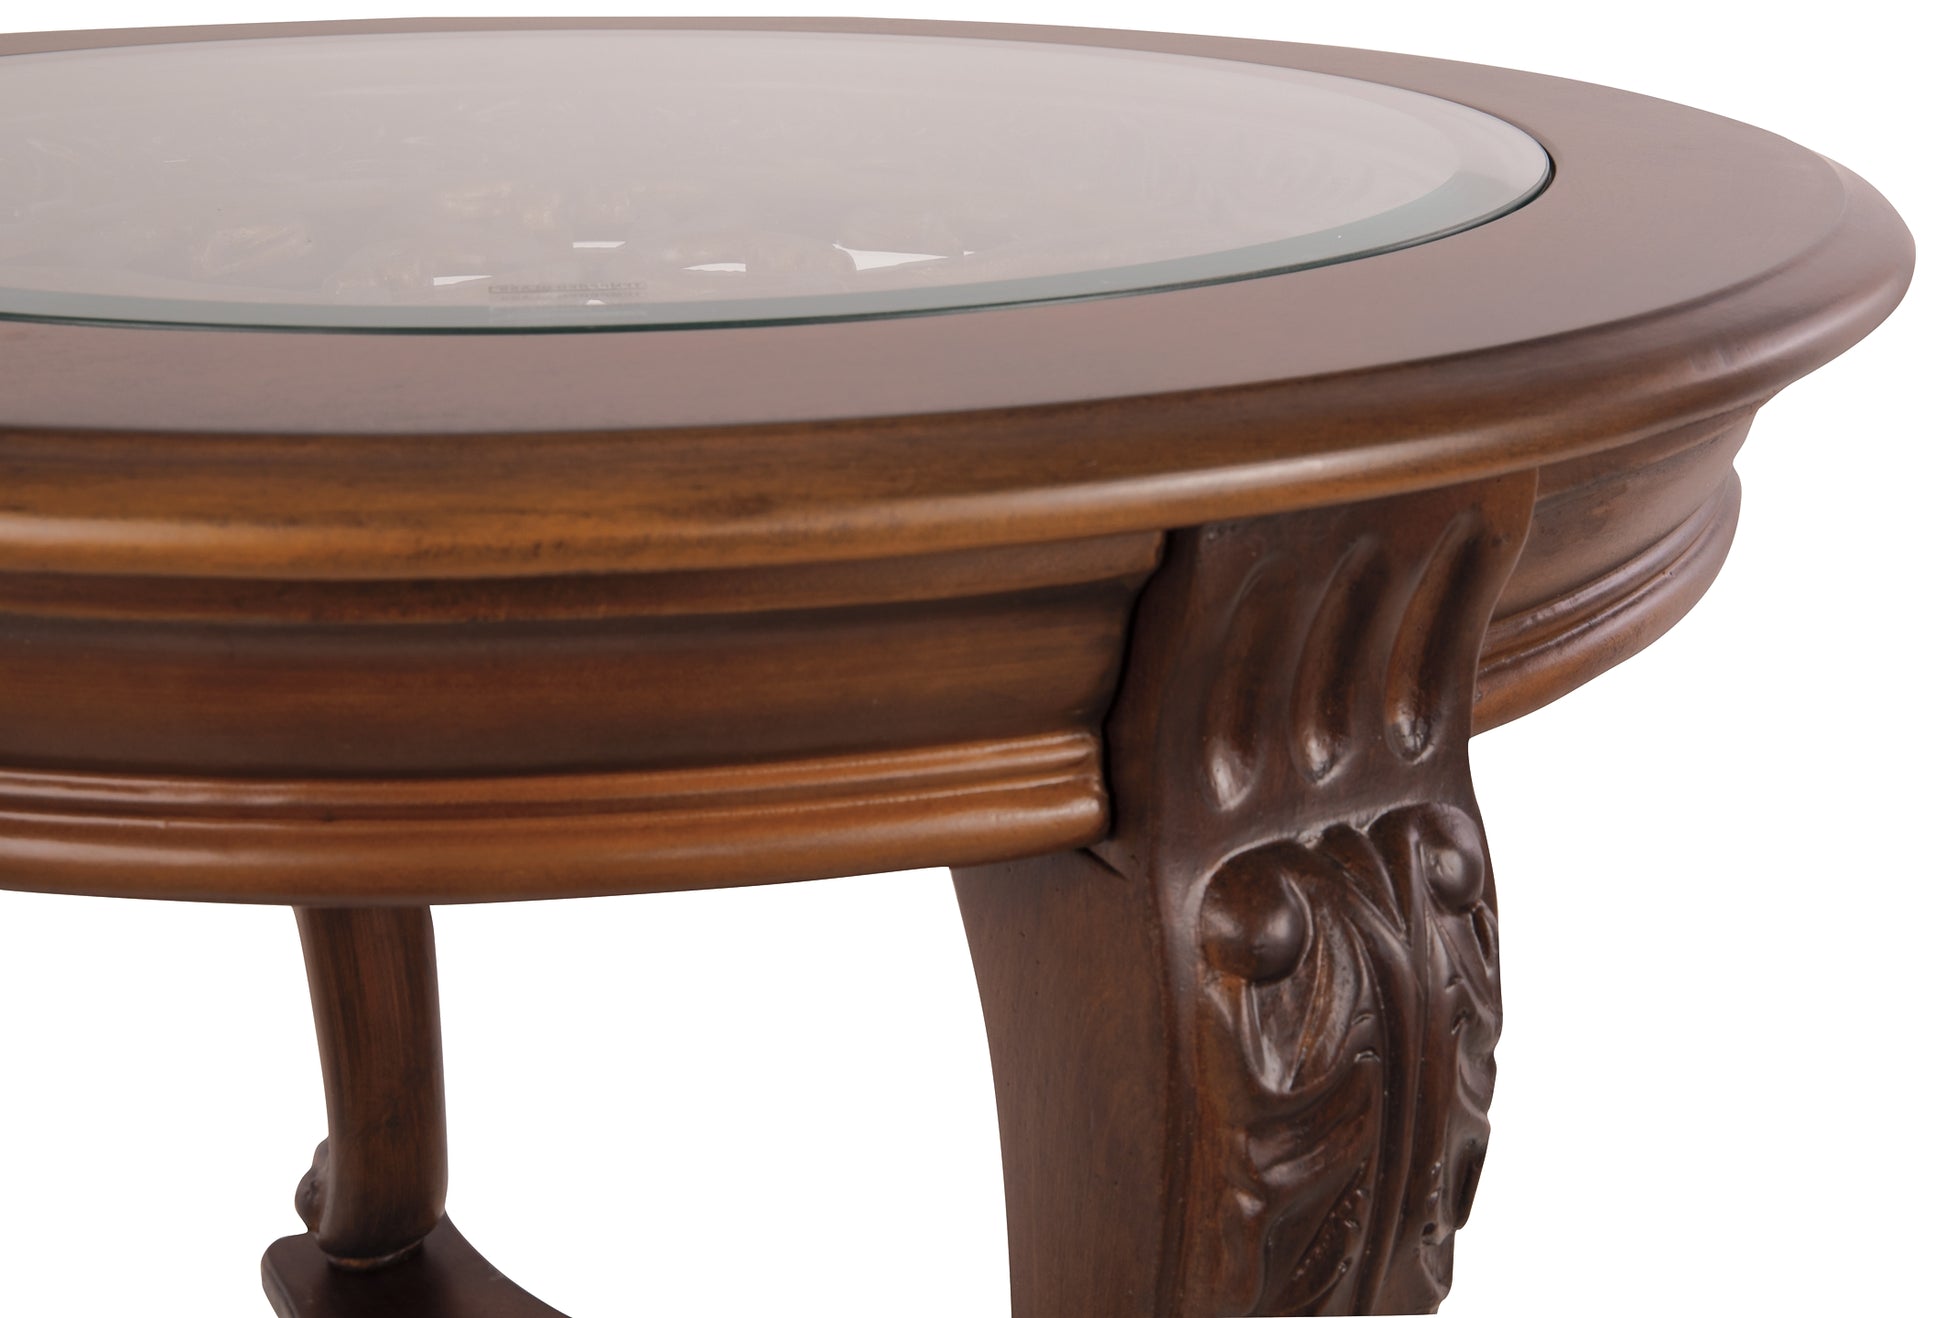 Norcastle Round End Table Signature Design by Ashley®